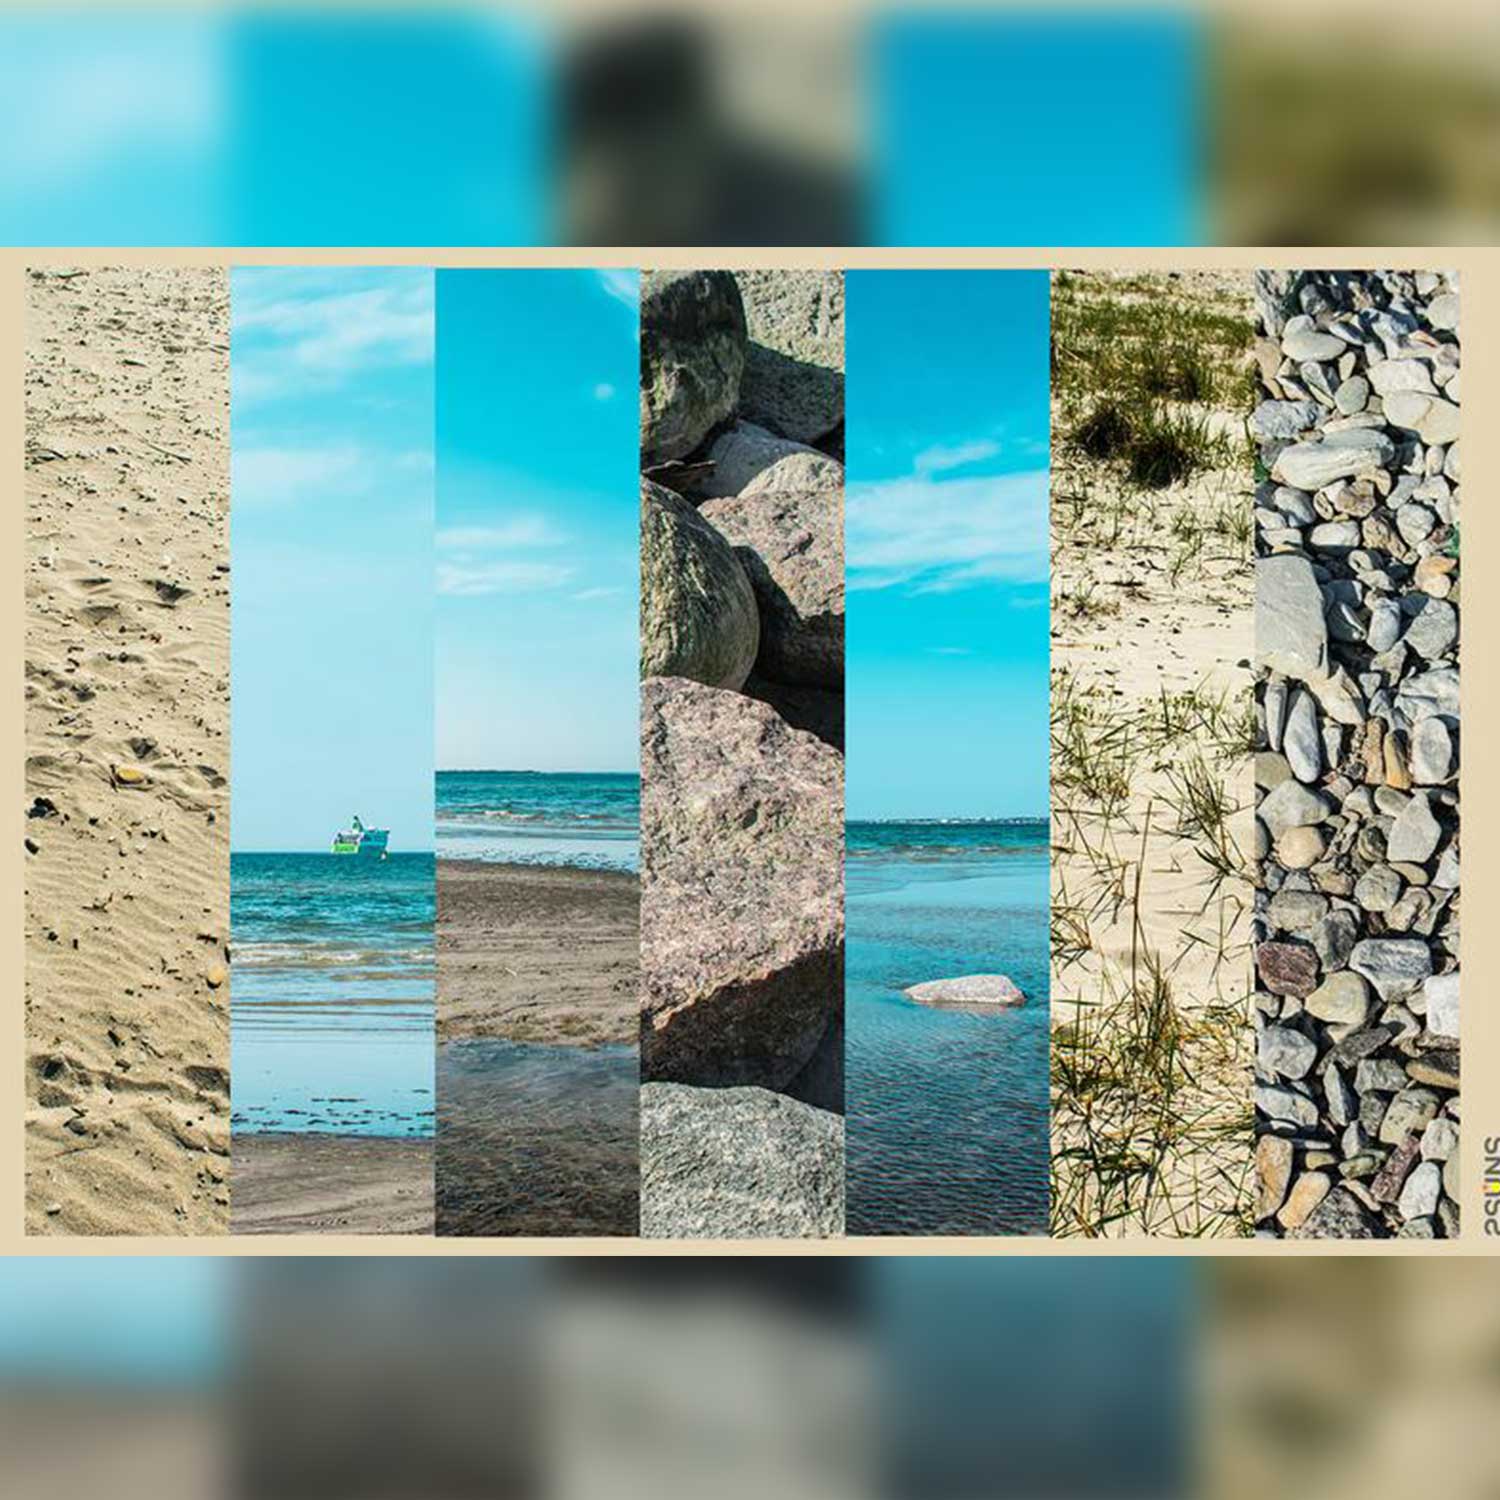 Natural Stone Sea And Beach Textures Examples.